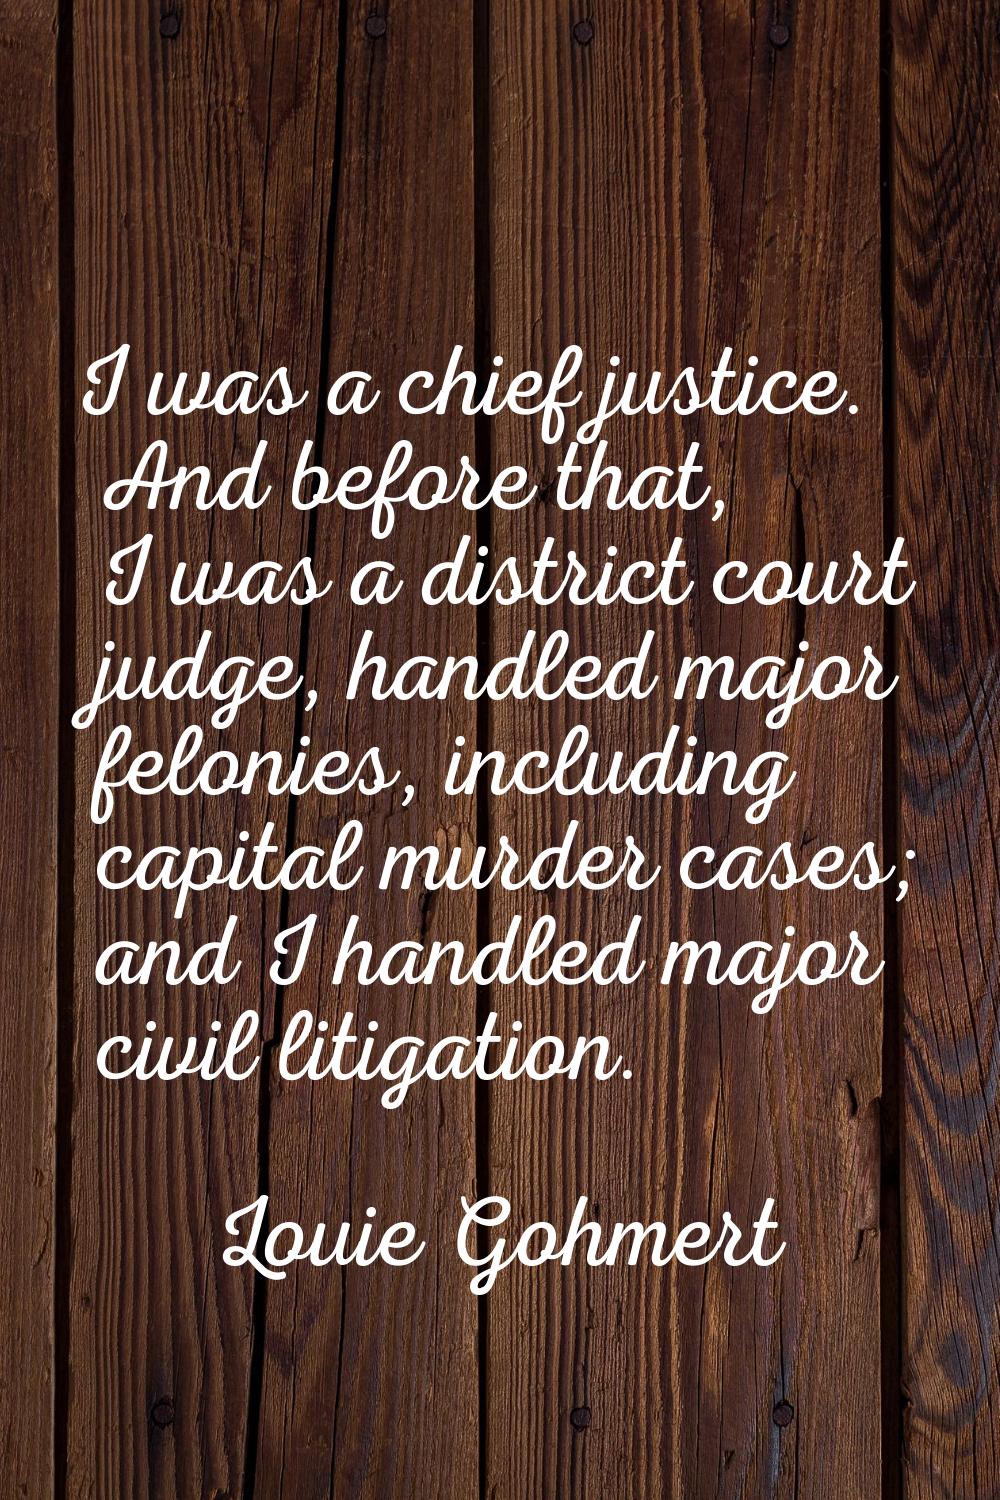 I was a chief justice. And before that, I was a district court judge, handled major felonies, inclu